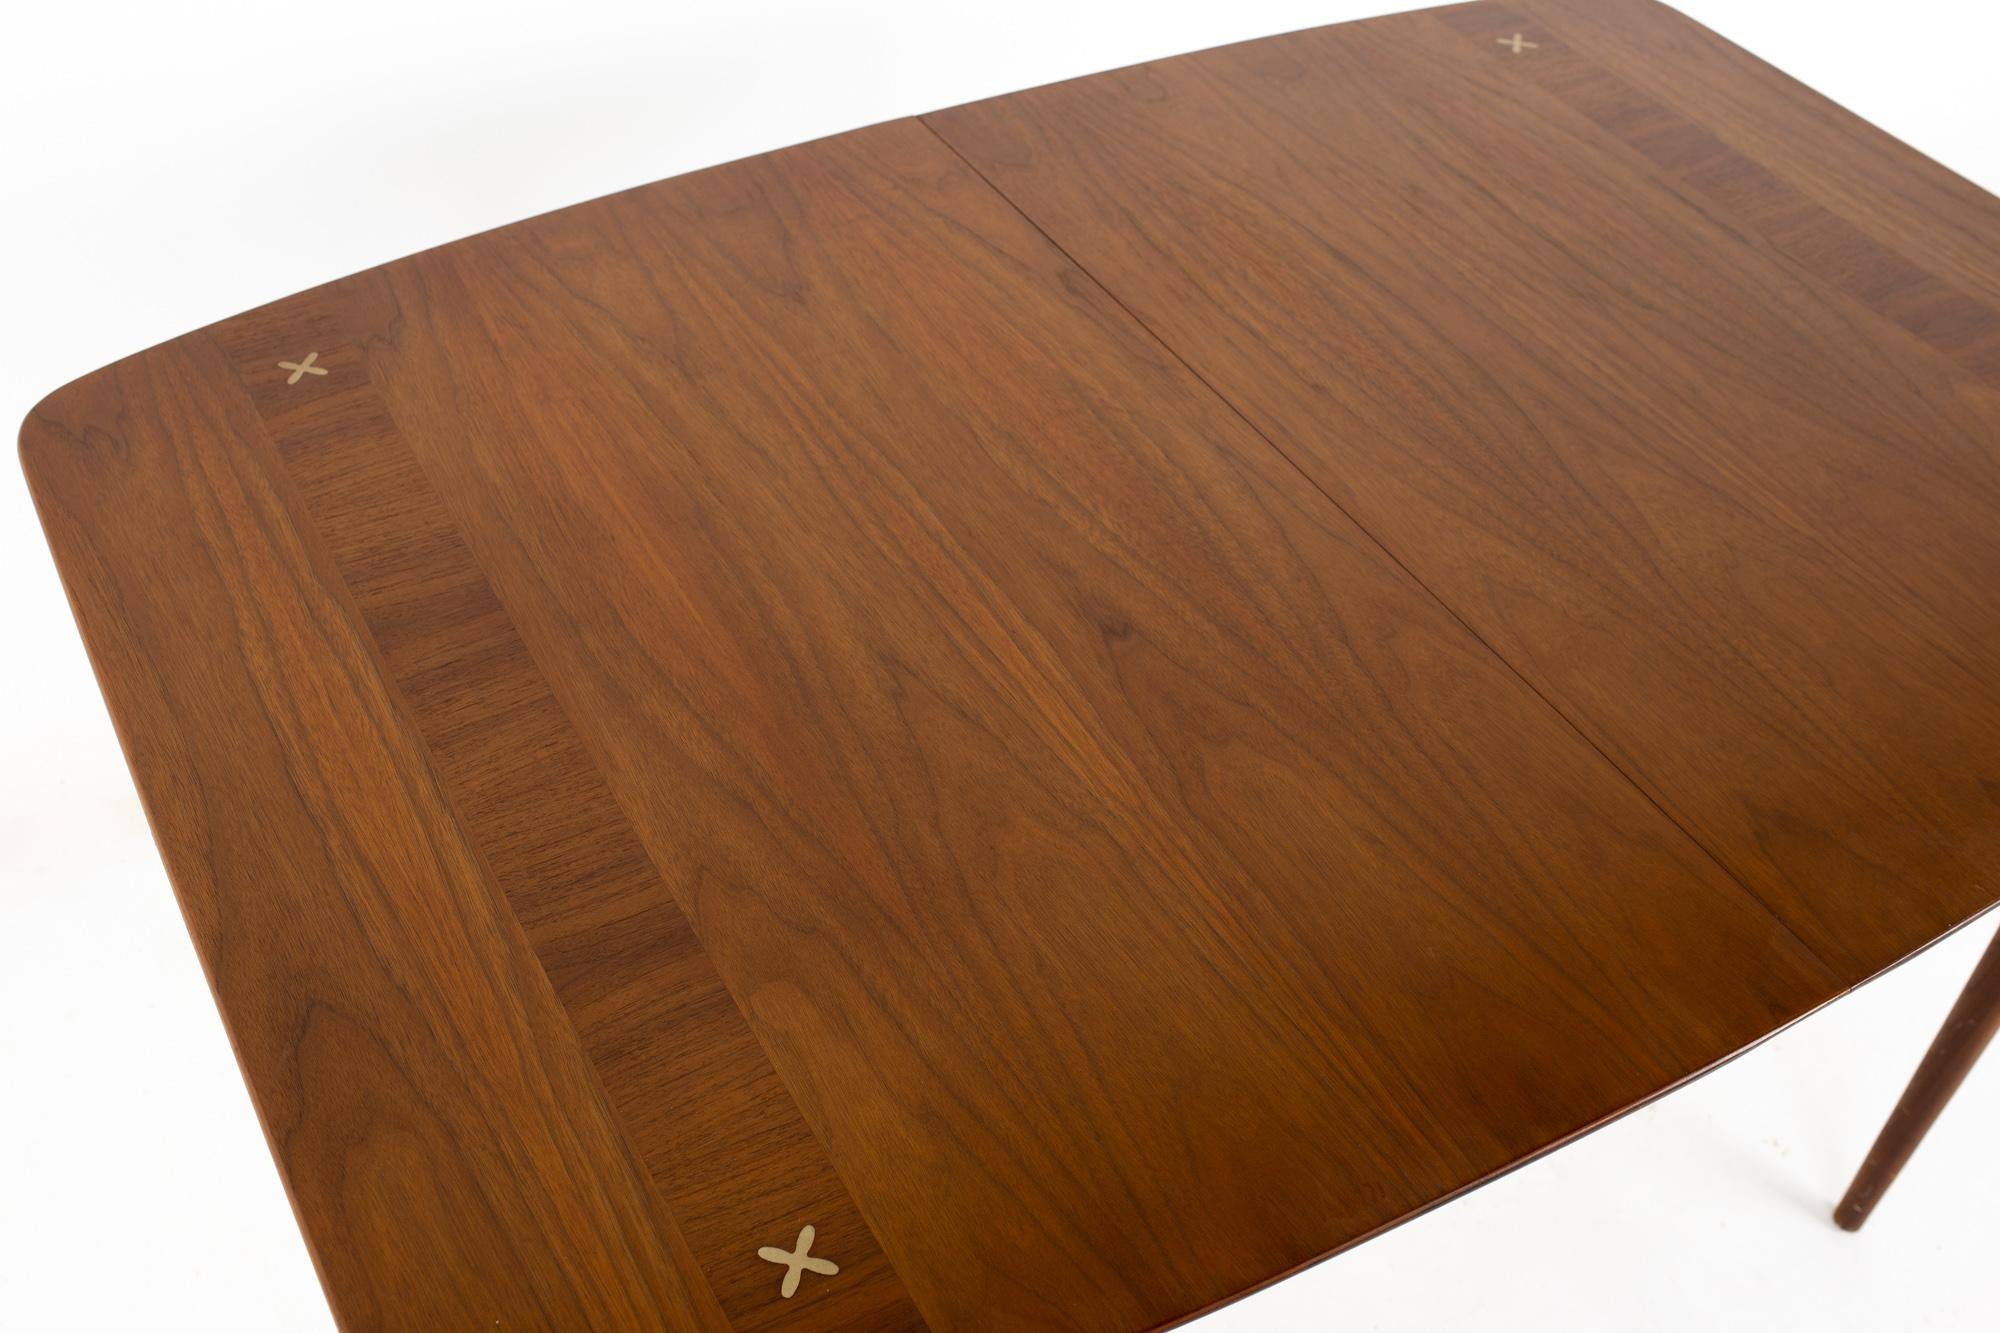 Late 20th Century Merton Gershun for American of Martinsville Dania Mid-Century Dining Table